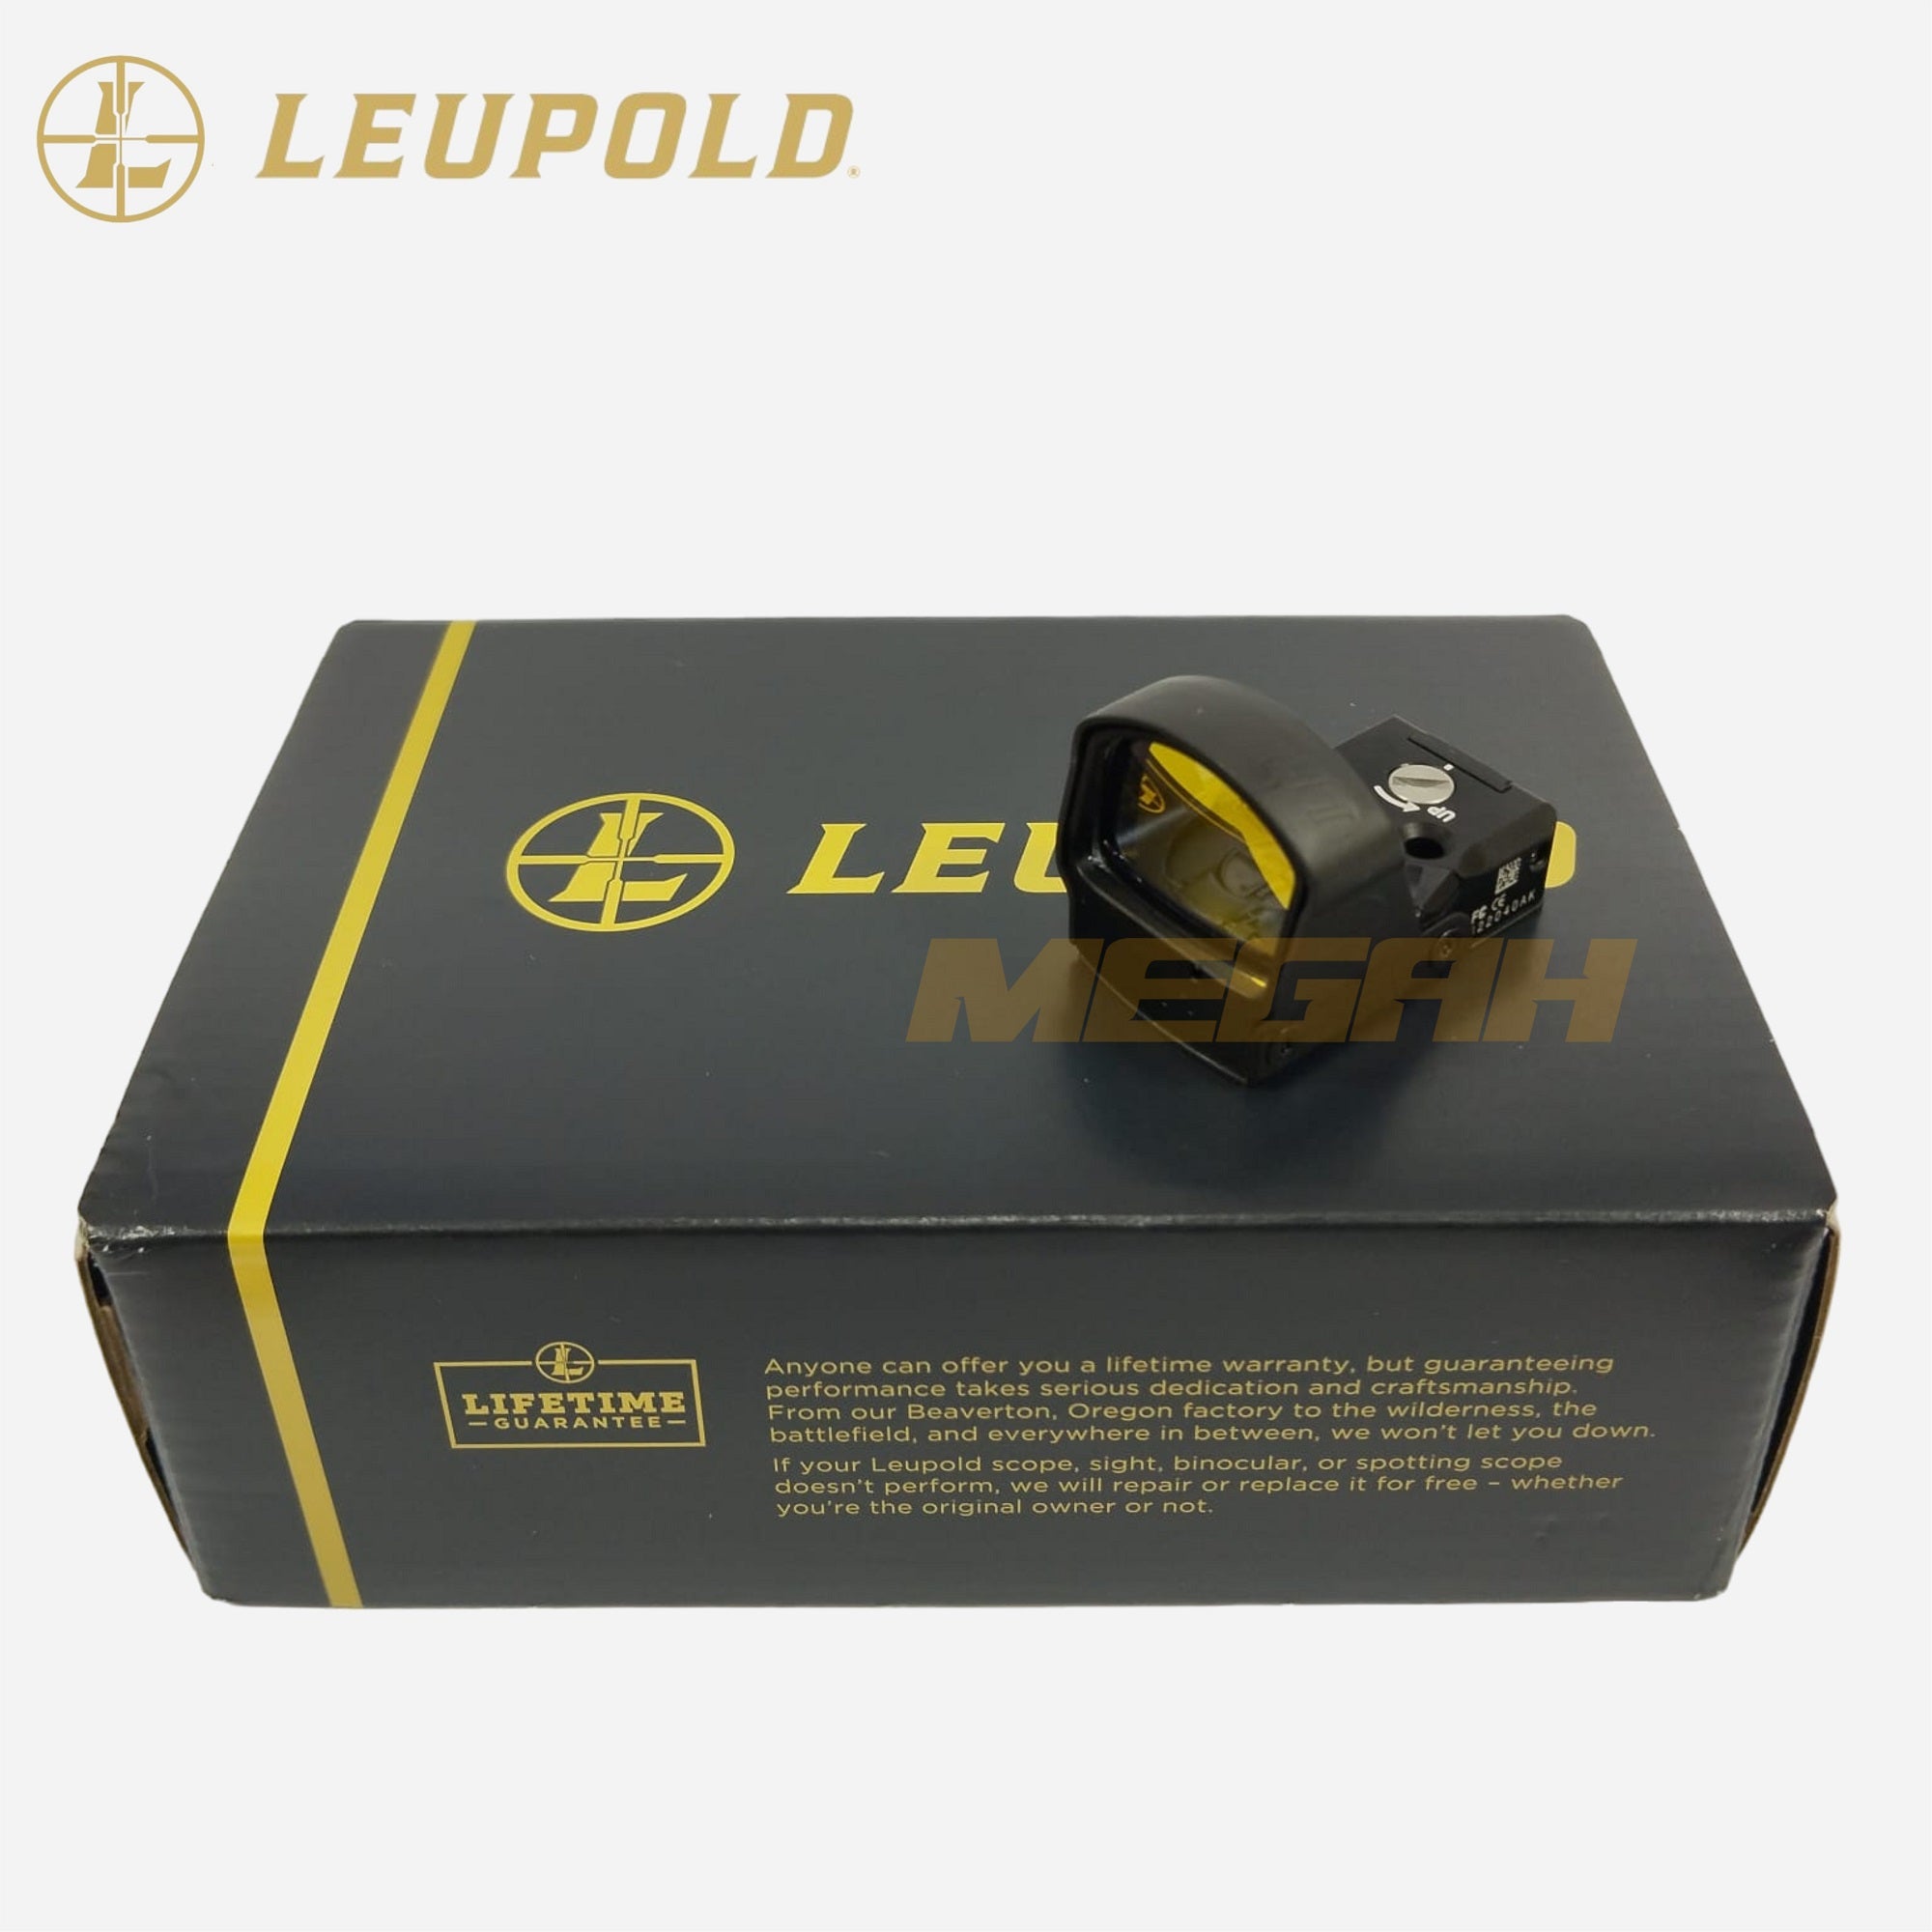 RED DOT LEUPOLD DELTAPOINT PRO